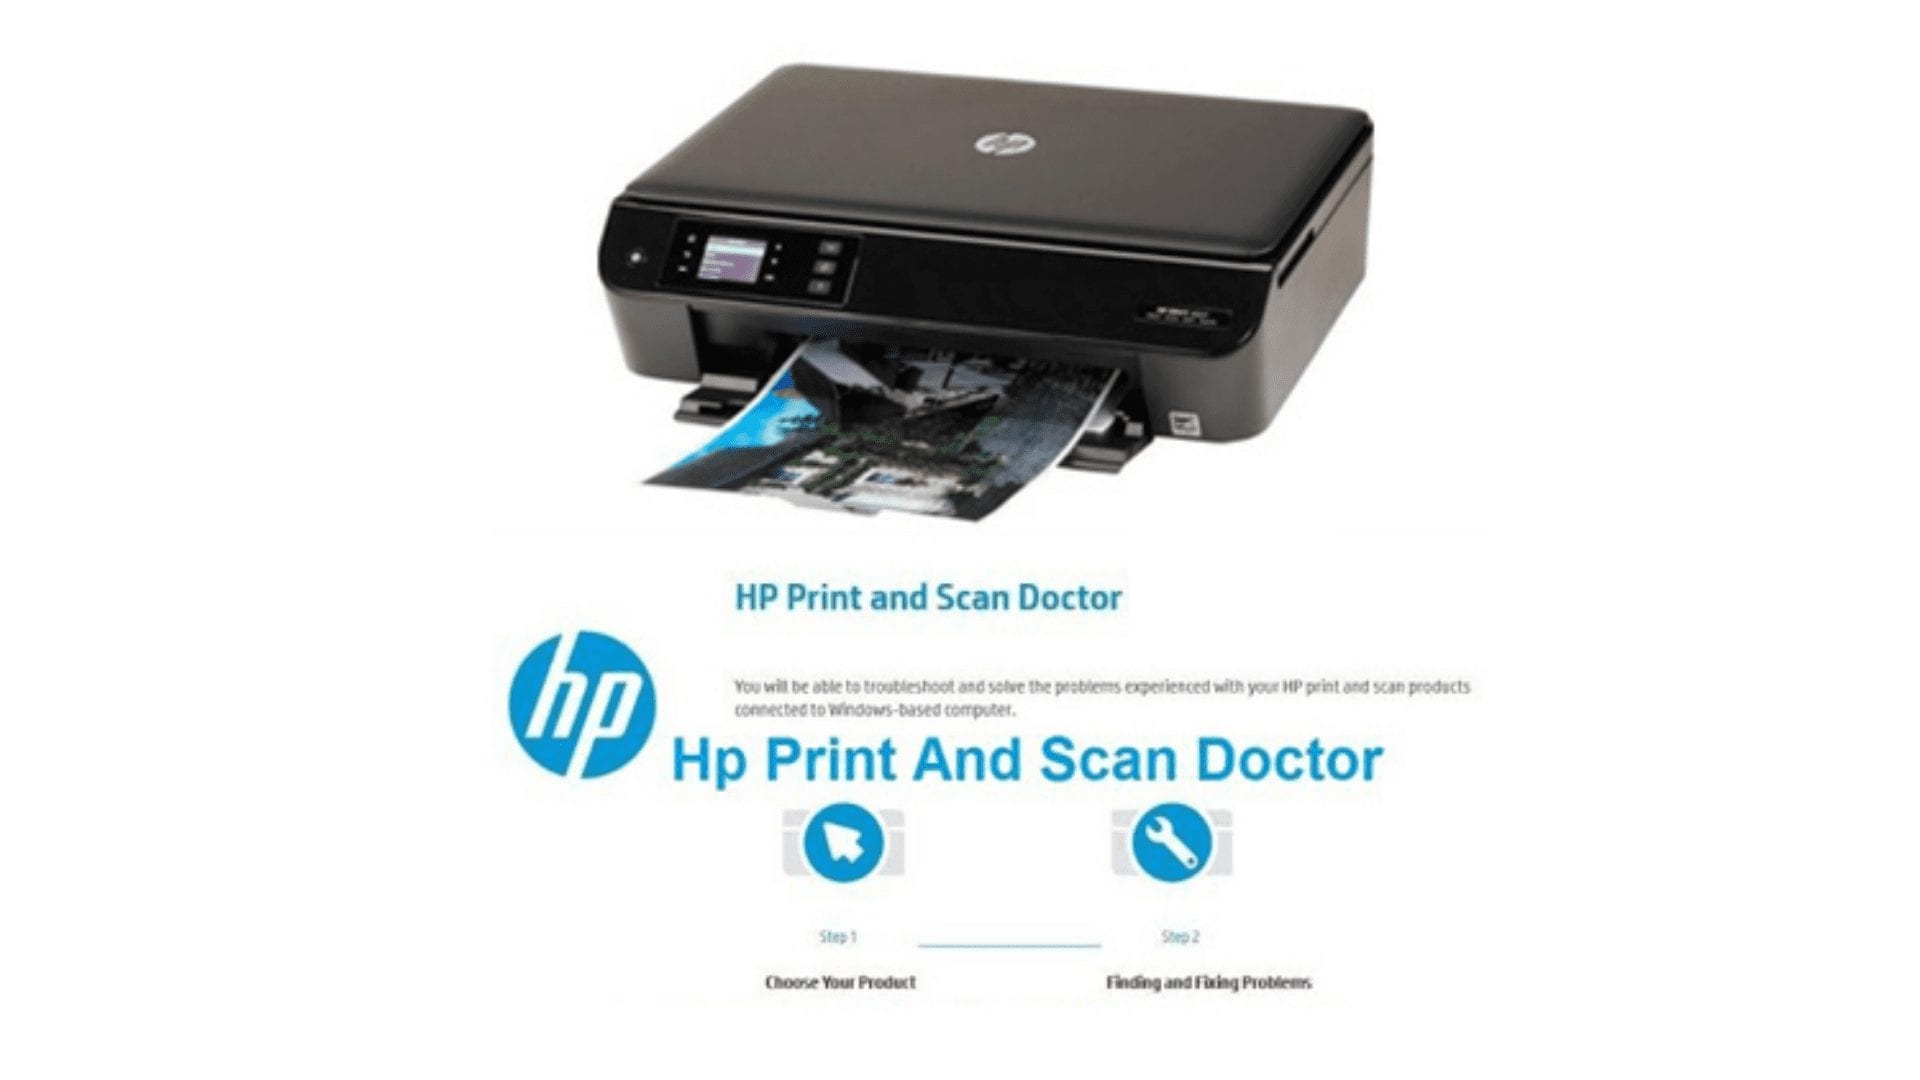 Hp printer and scan doctor